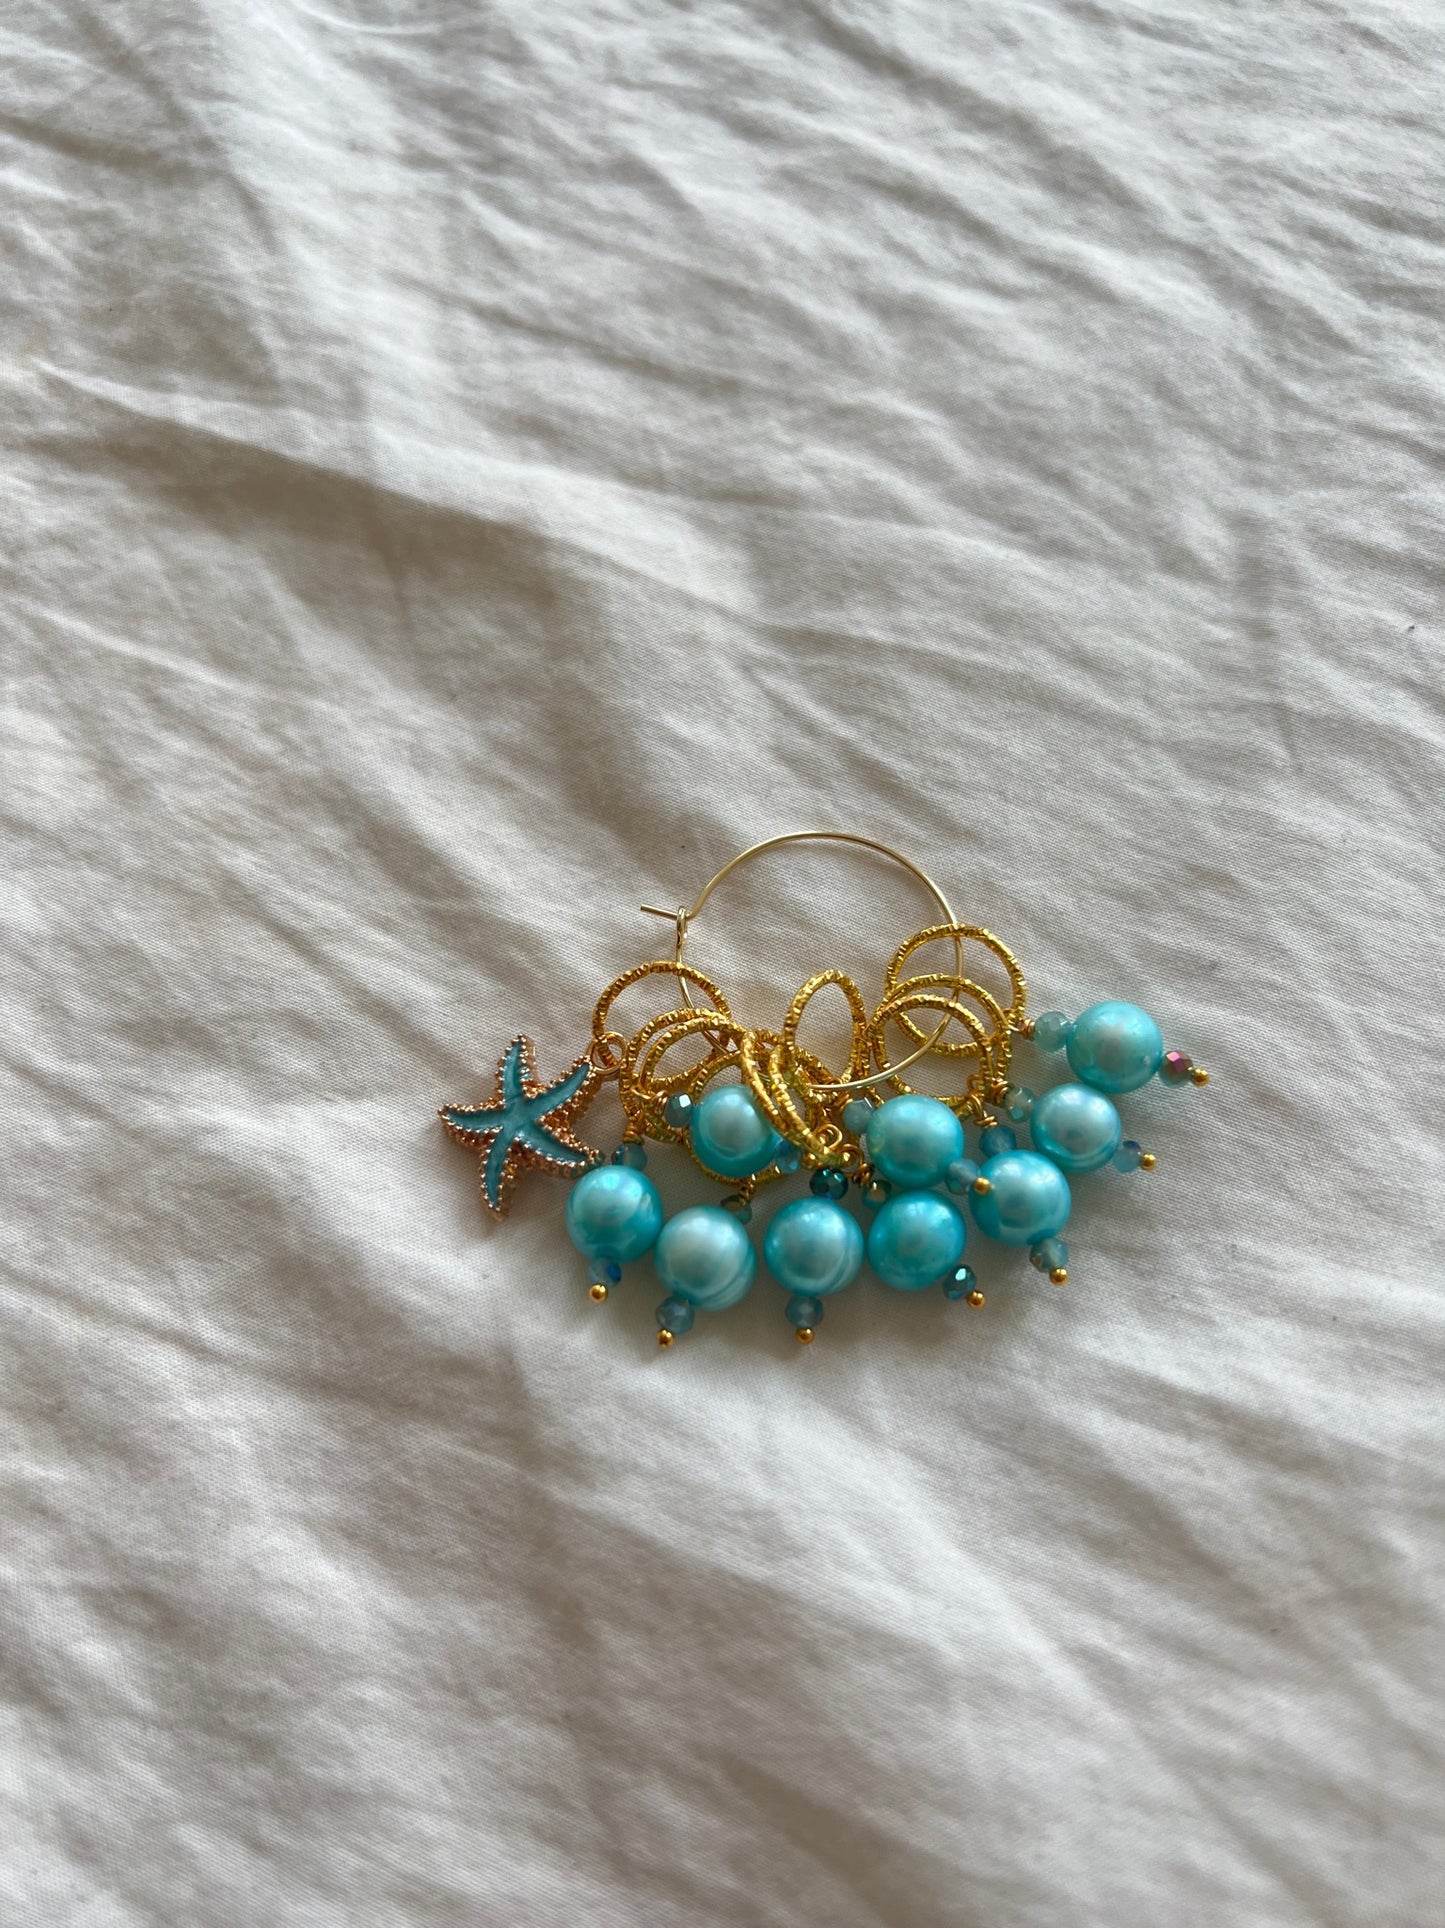 Mask markers with large turquoise freshwater pearls and pendants, 10 pcs.